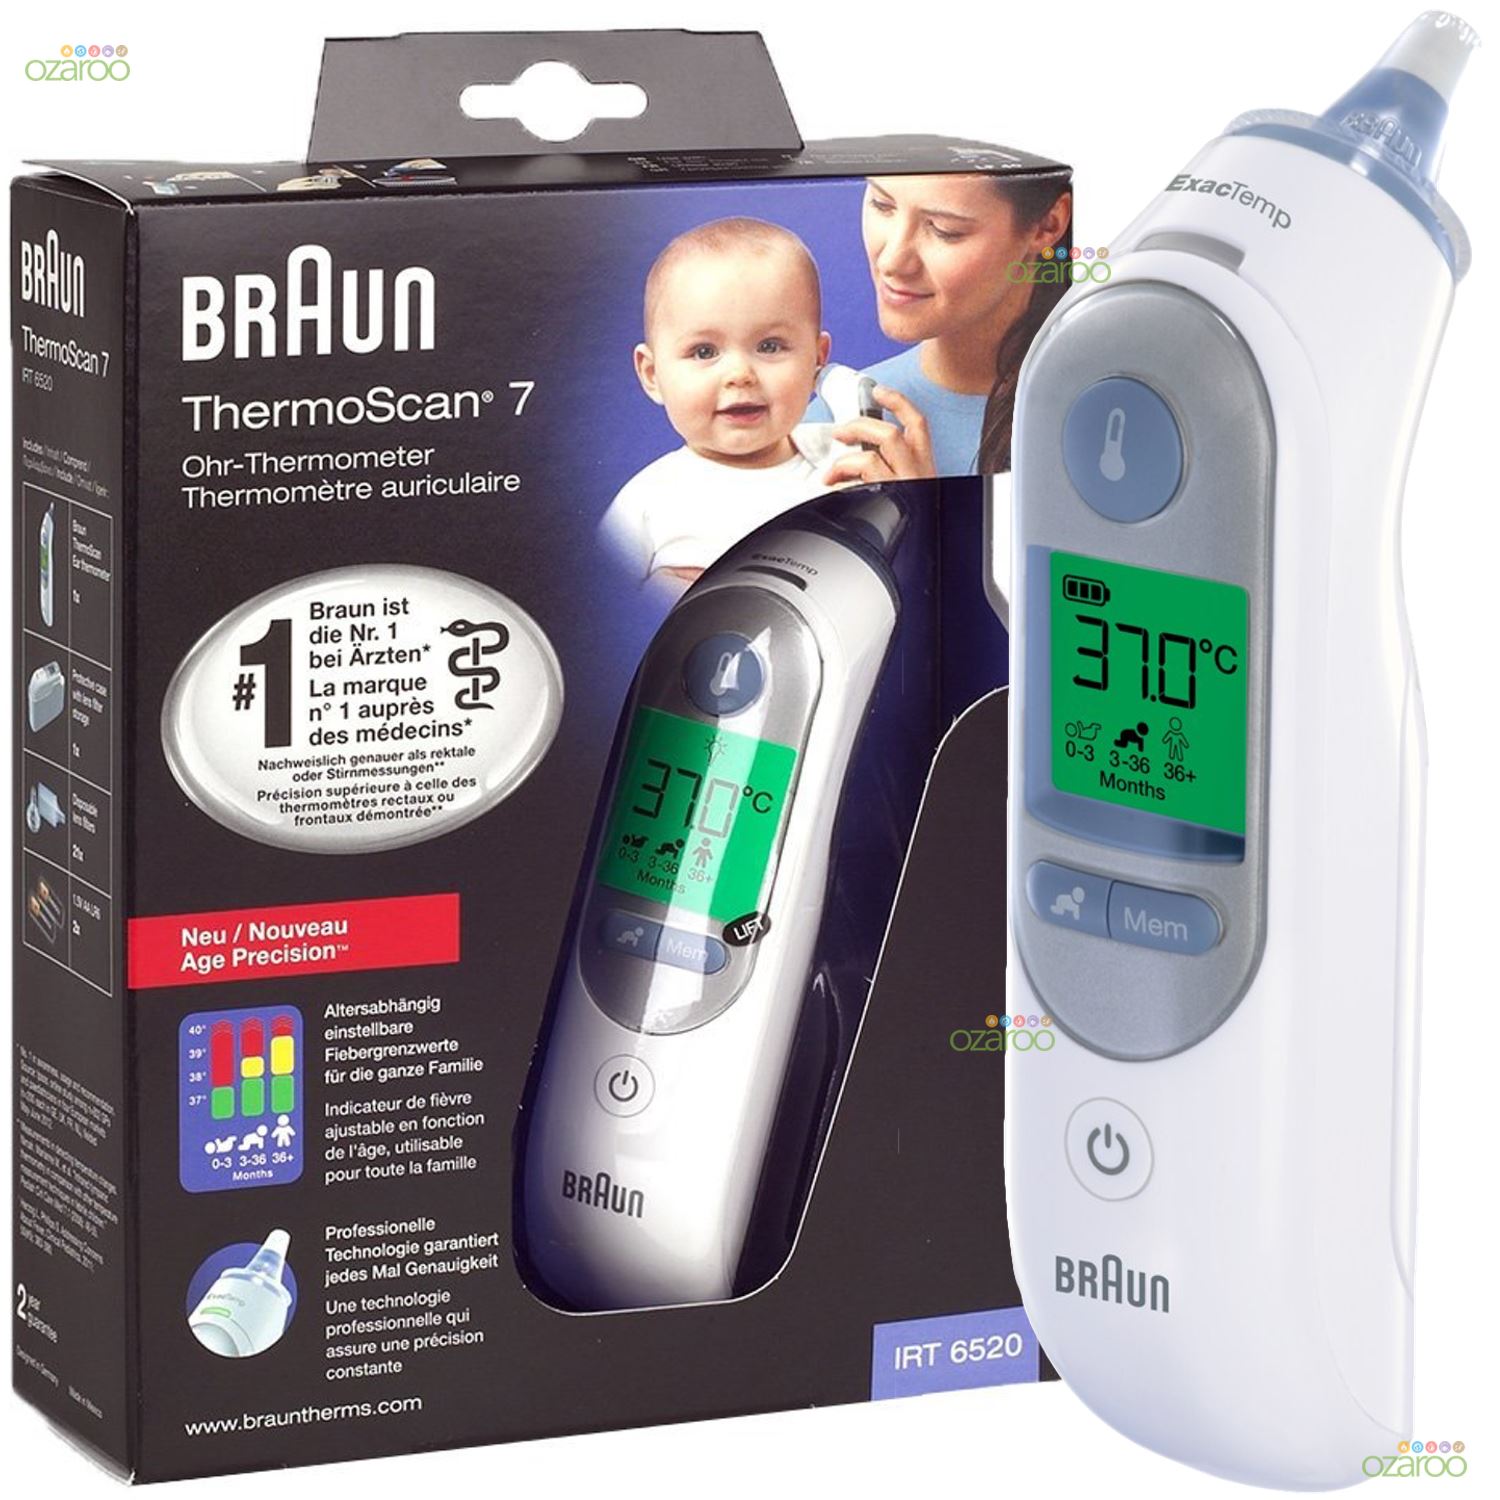 BRAUN THERMOSCAN 7 THERMOMETRE AURICULAIRE IRT6520